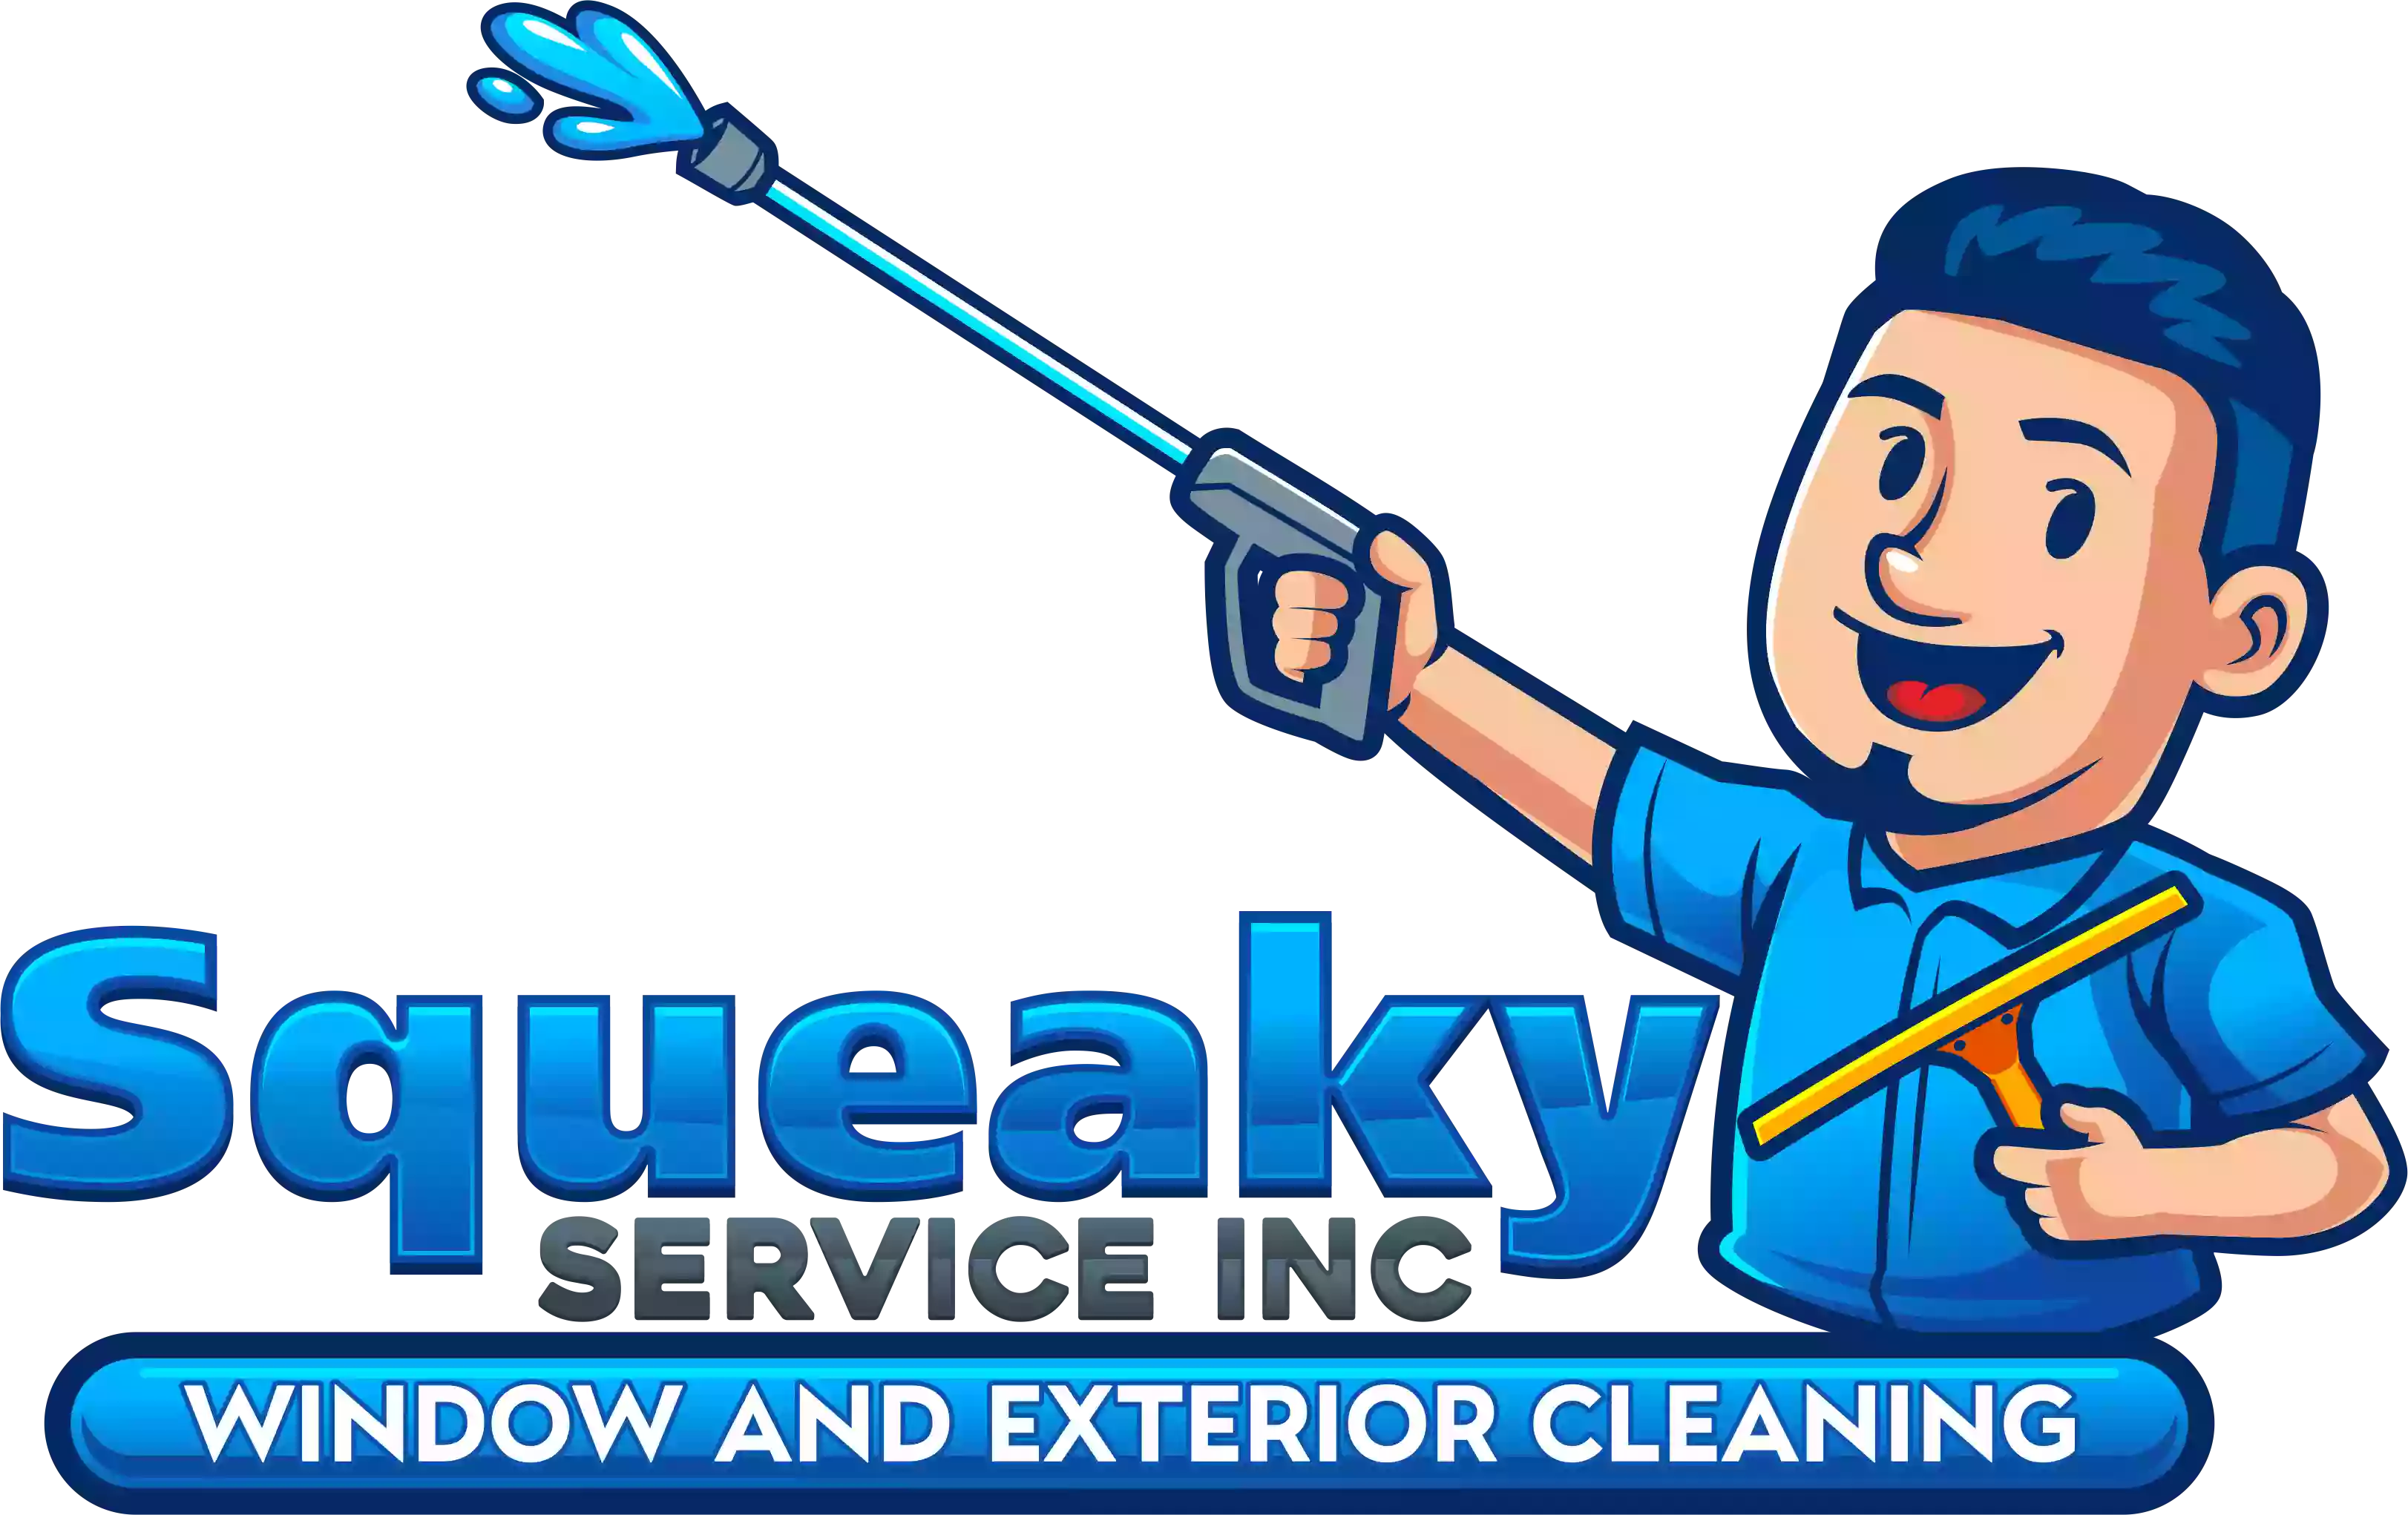 Squeaky Service